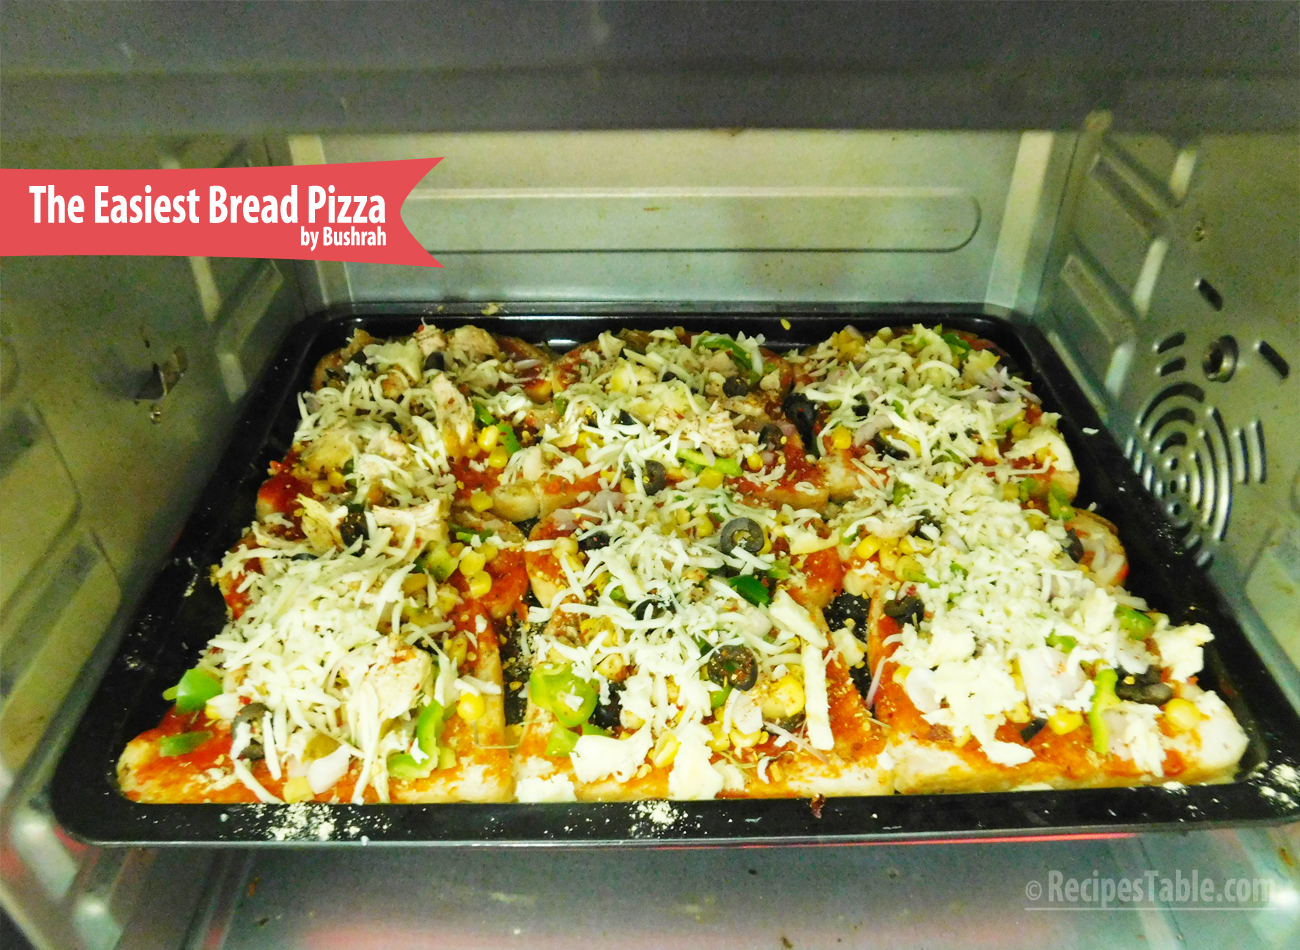 The Easiest Bread Pizza